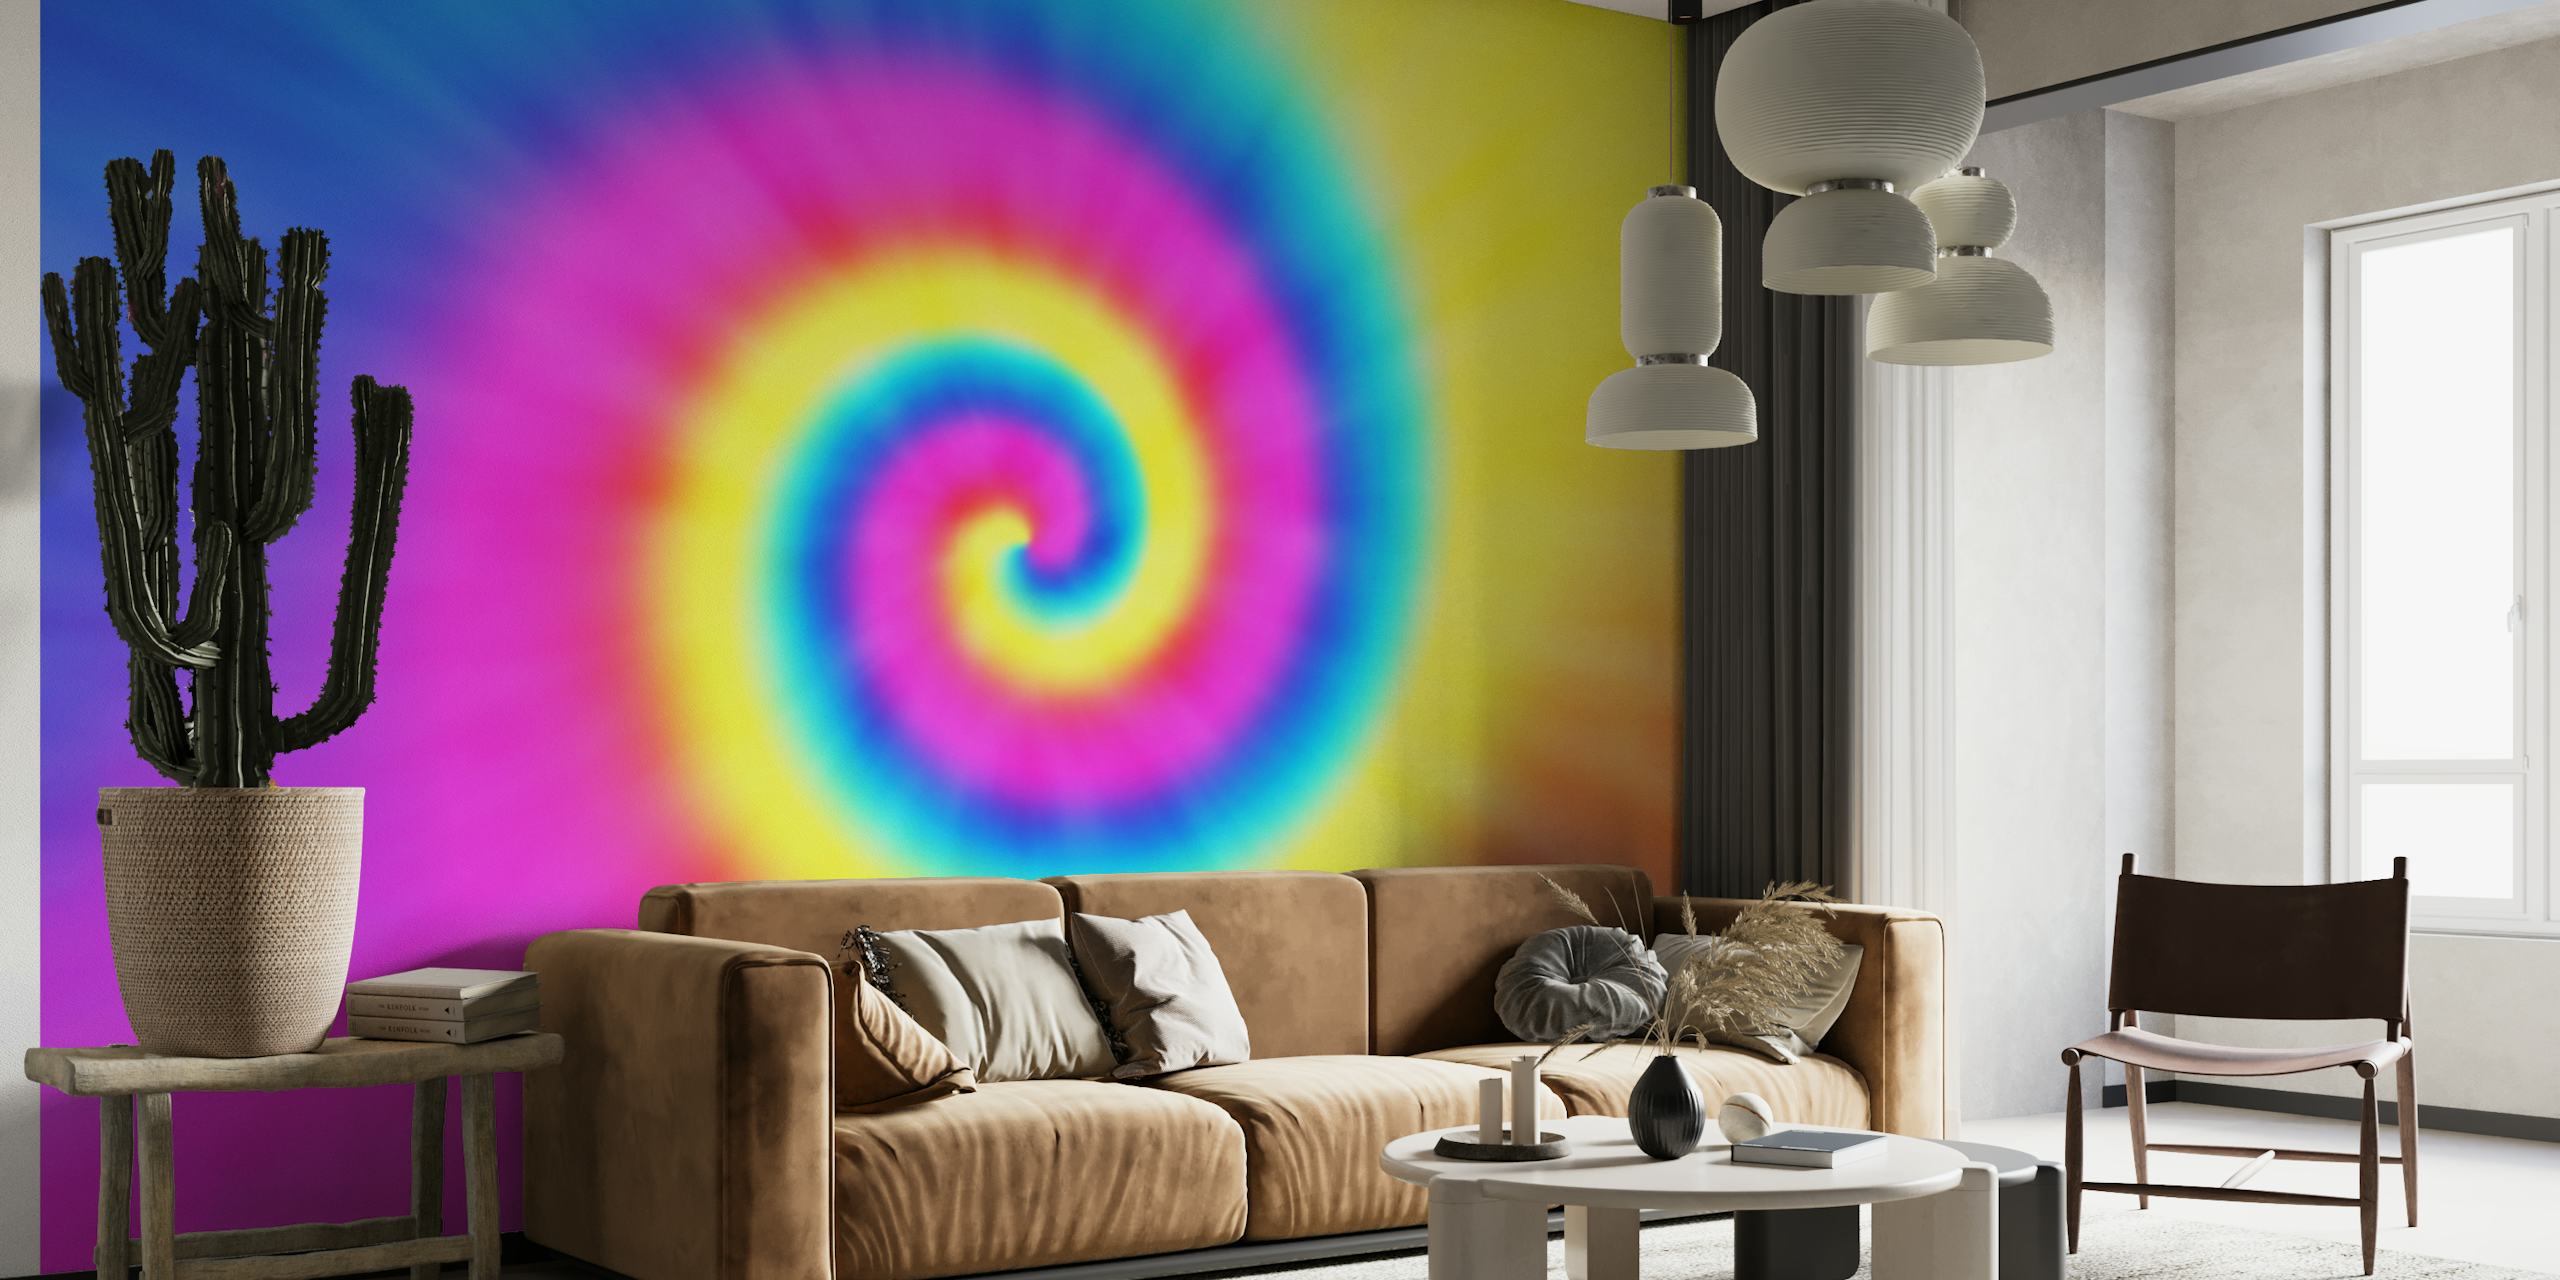 Psychedelic Tie Dye wall mural with vibrant, swirling colors